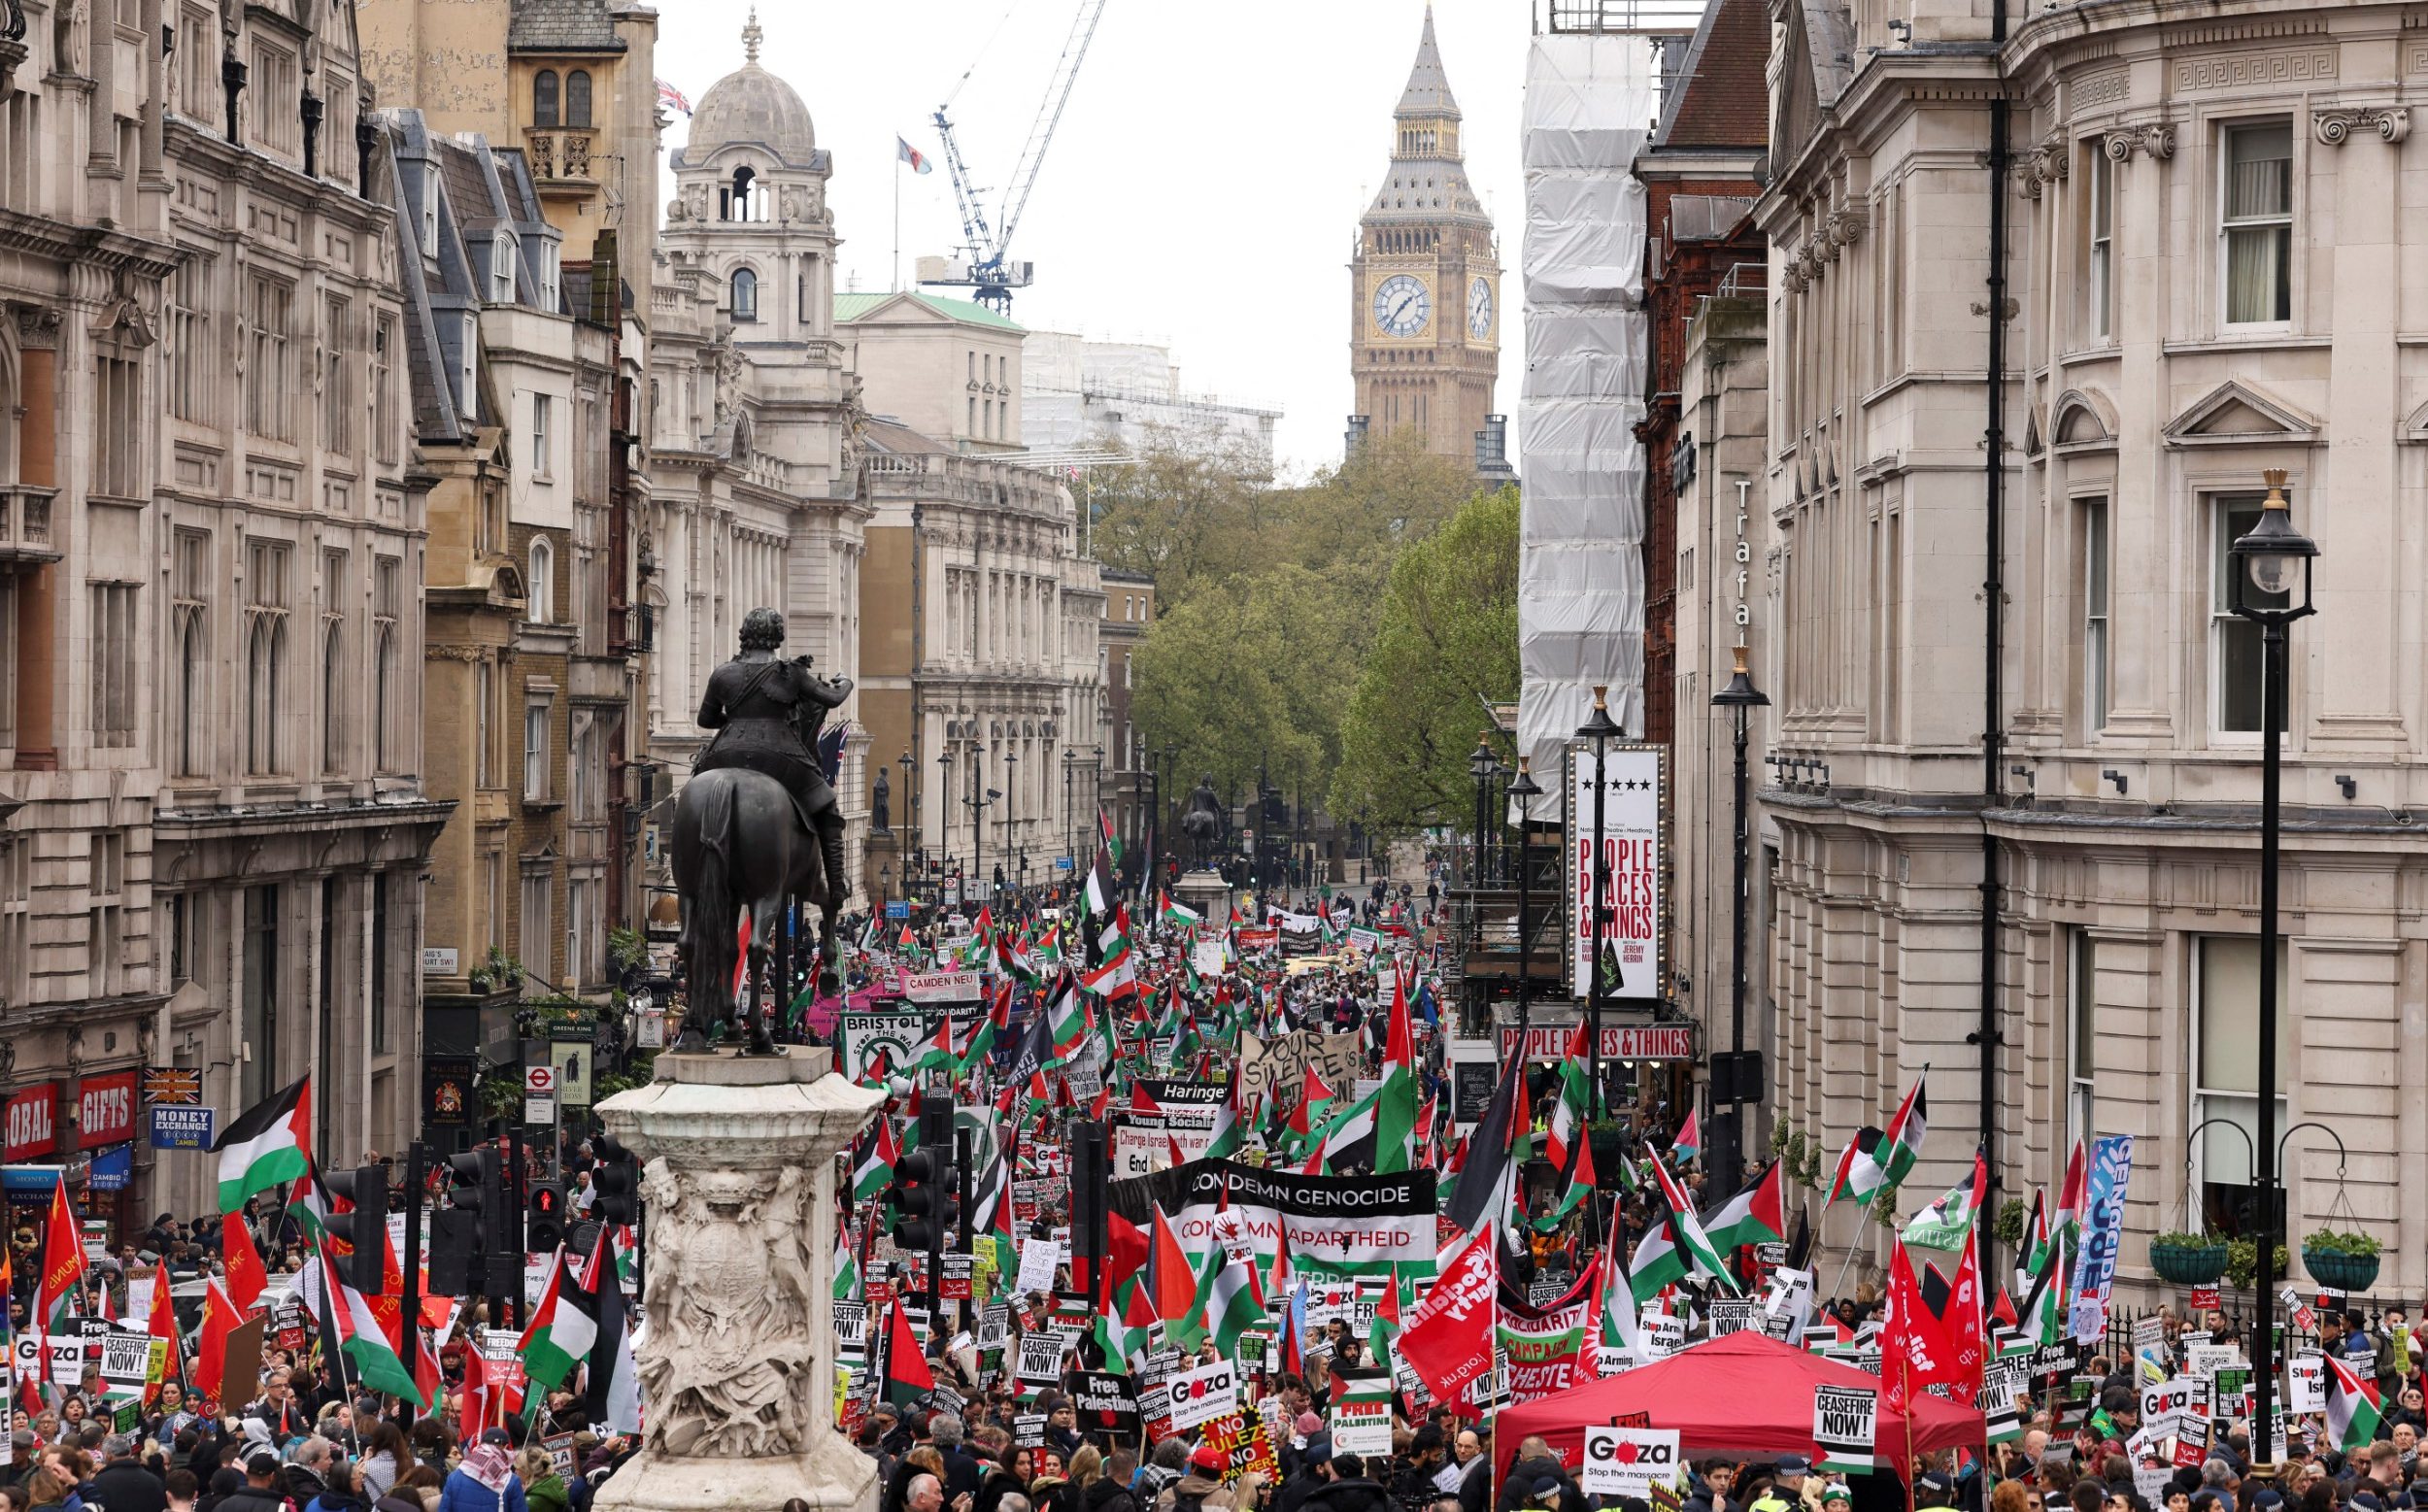 met police deny responsibility for covering up holocaust memorial during pro-palestinian march